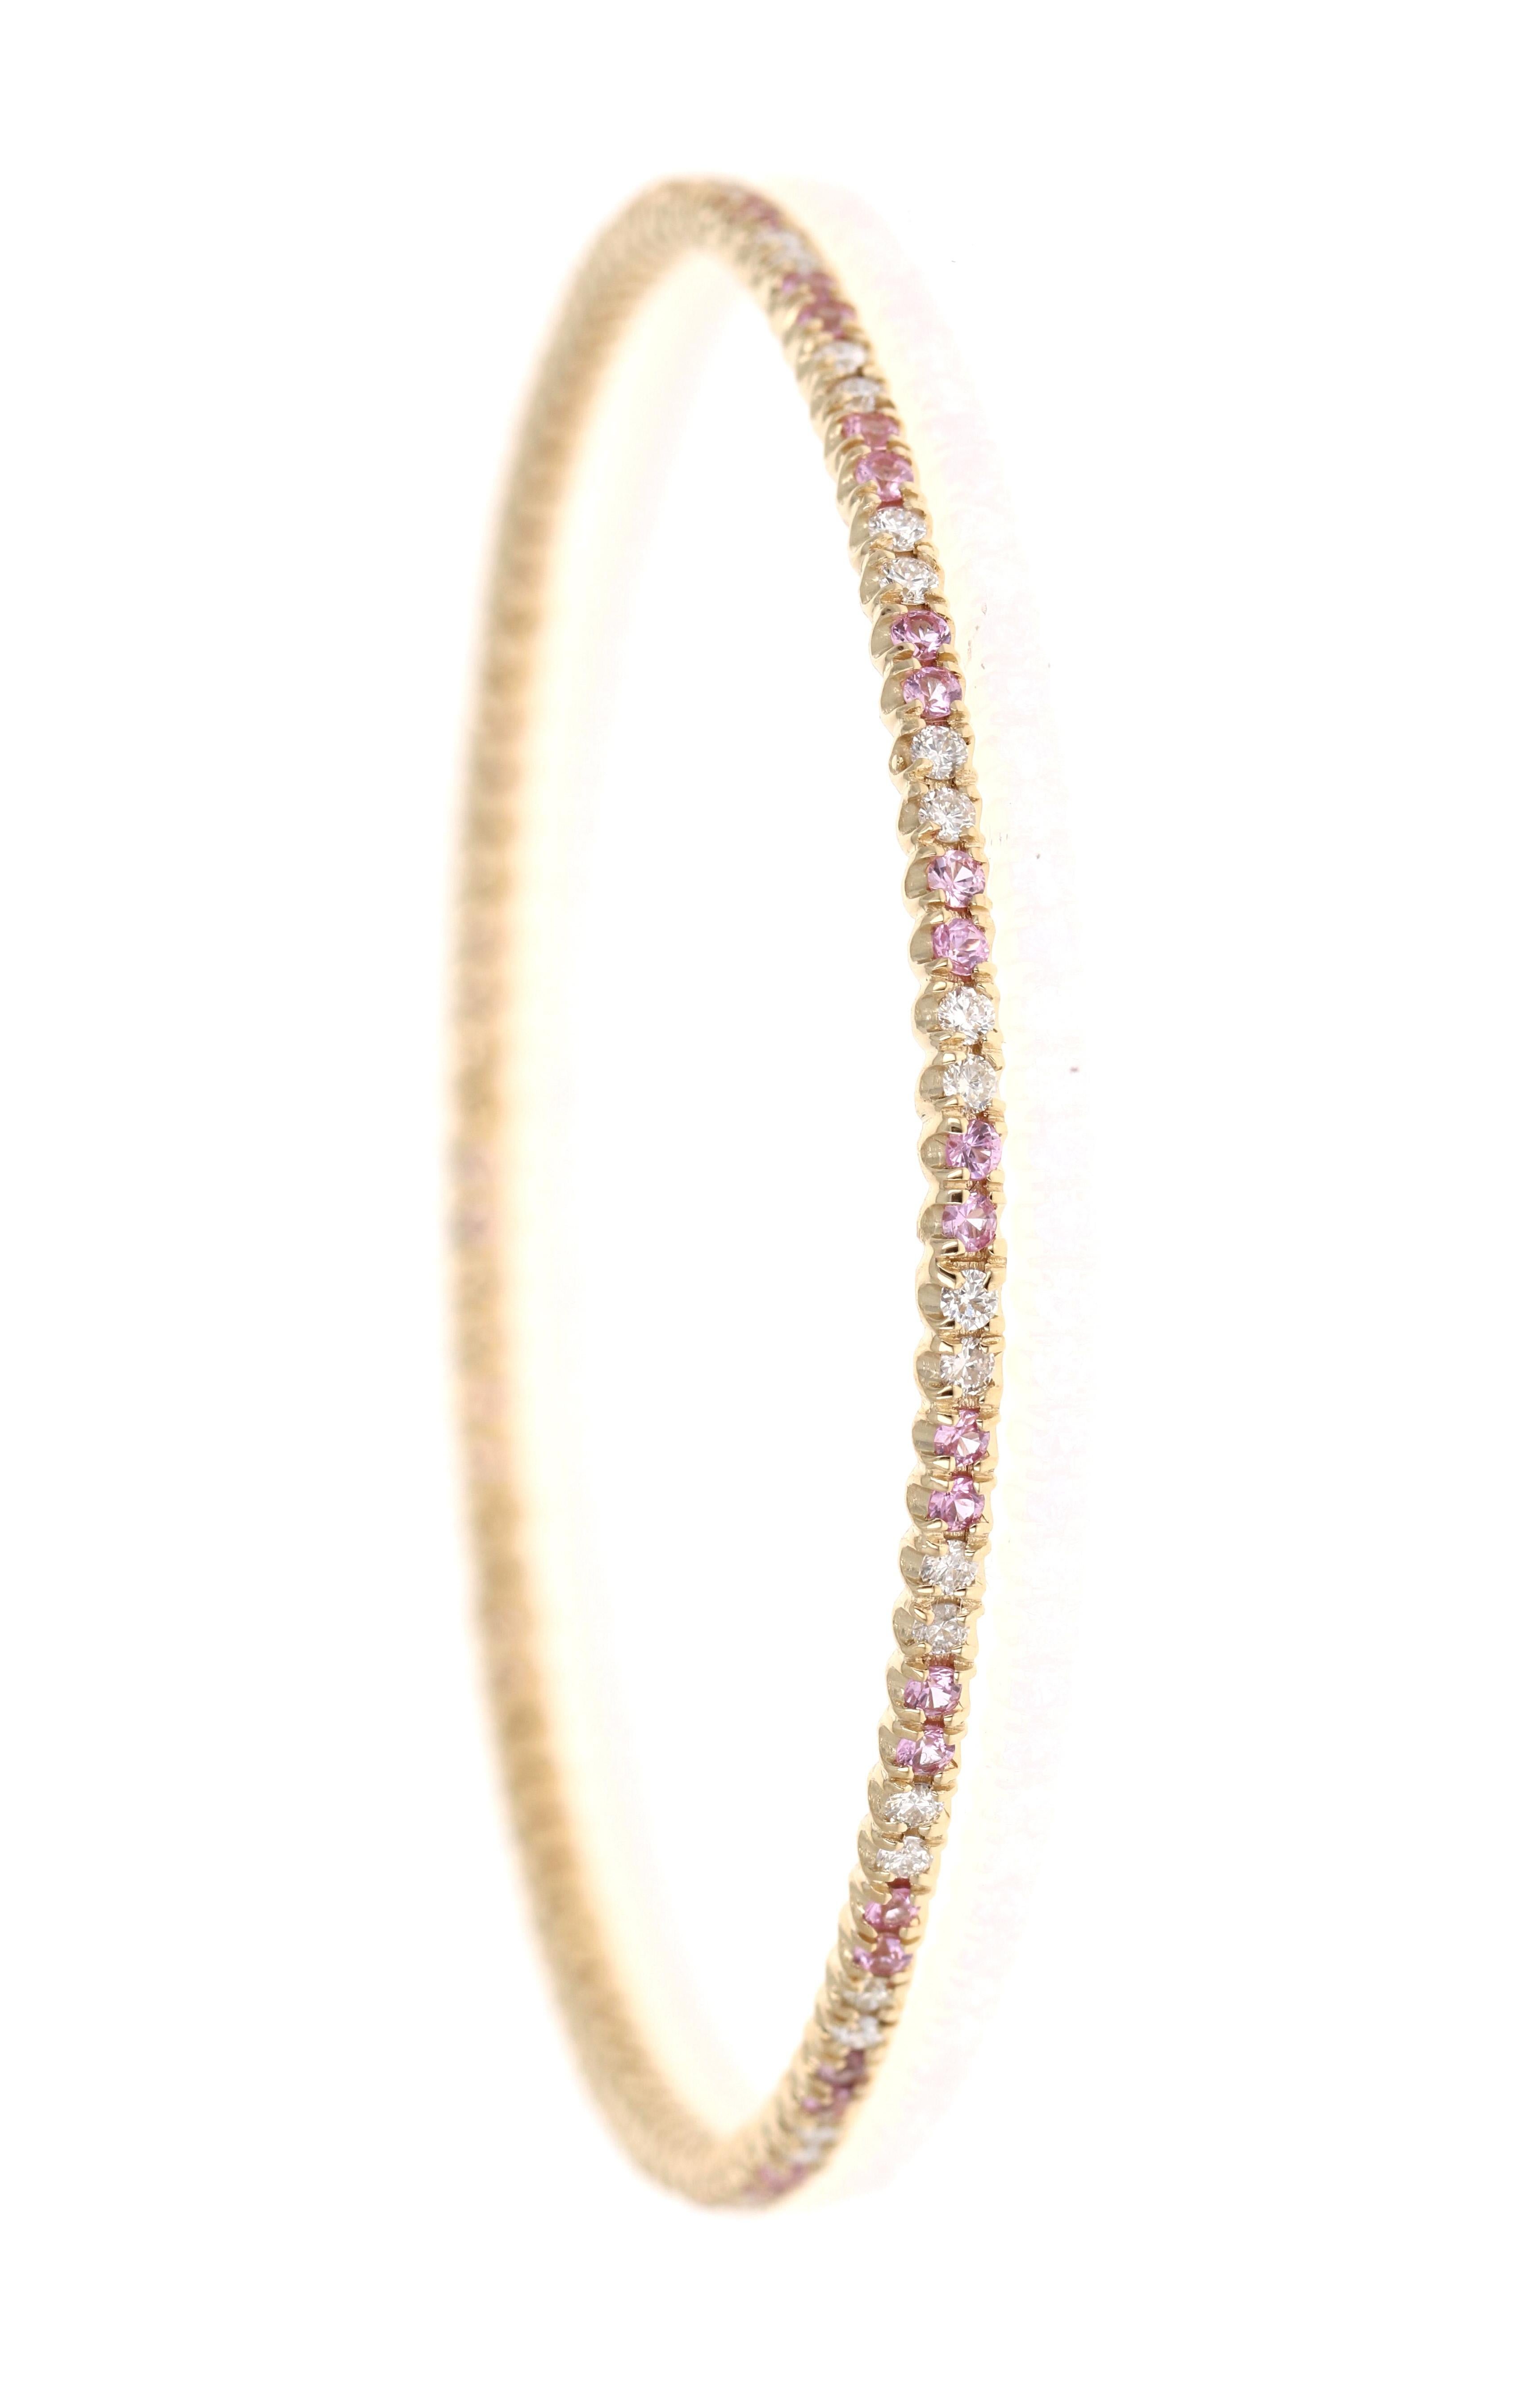 Dainty yet a Bold Beauty! 

This stunning Eternity, Stackable Diamond and Sapphire Bangle has 48 Round Cut Diamonds that weigh 1.20 Carats (Clarity: SI-F) and 48 Round Cut Pink Sapphires that weigh 1.52 Carats. The total carat weight of the Bangle